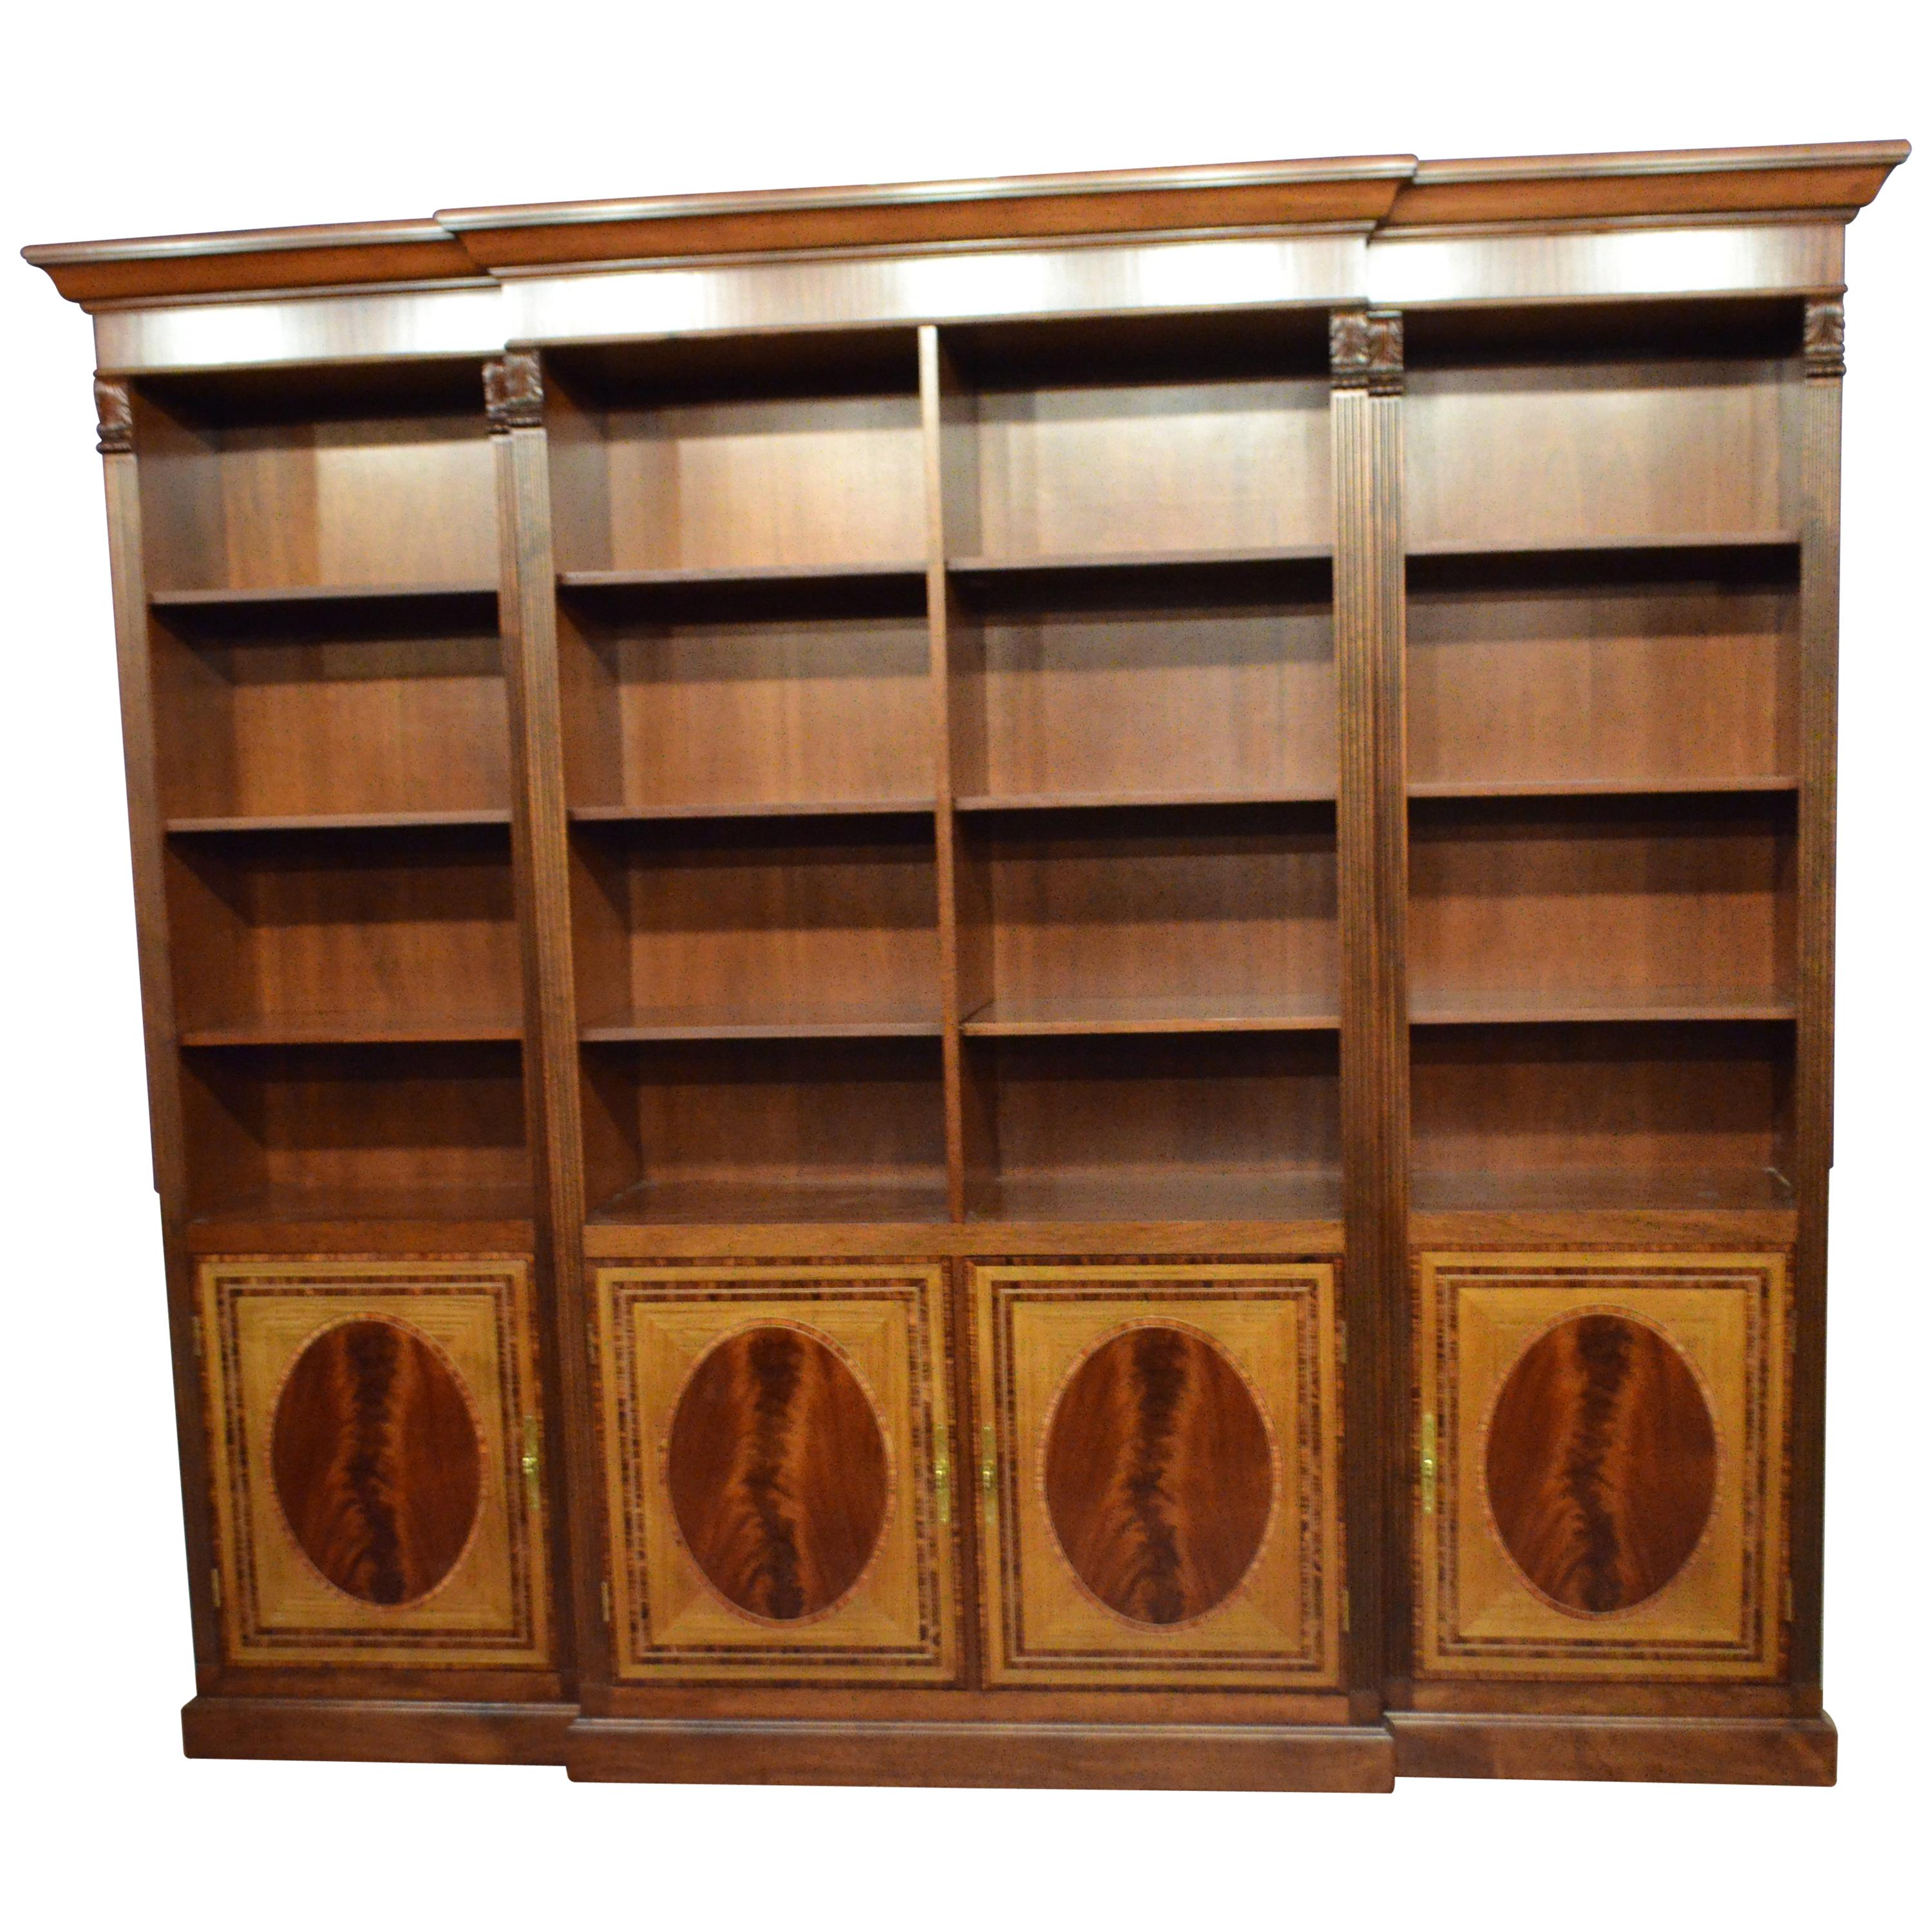 Large Mahogany Georgian Style Four-Door Bookcase by Leighton Hall